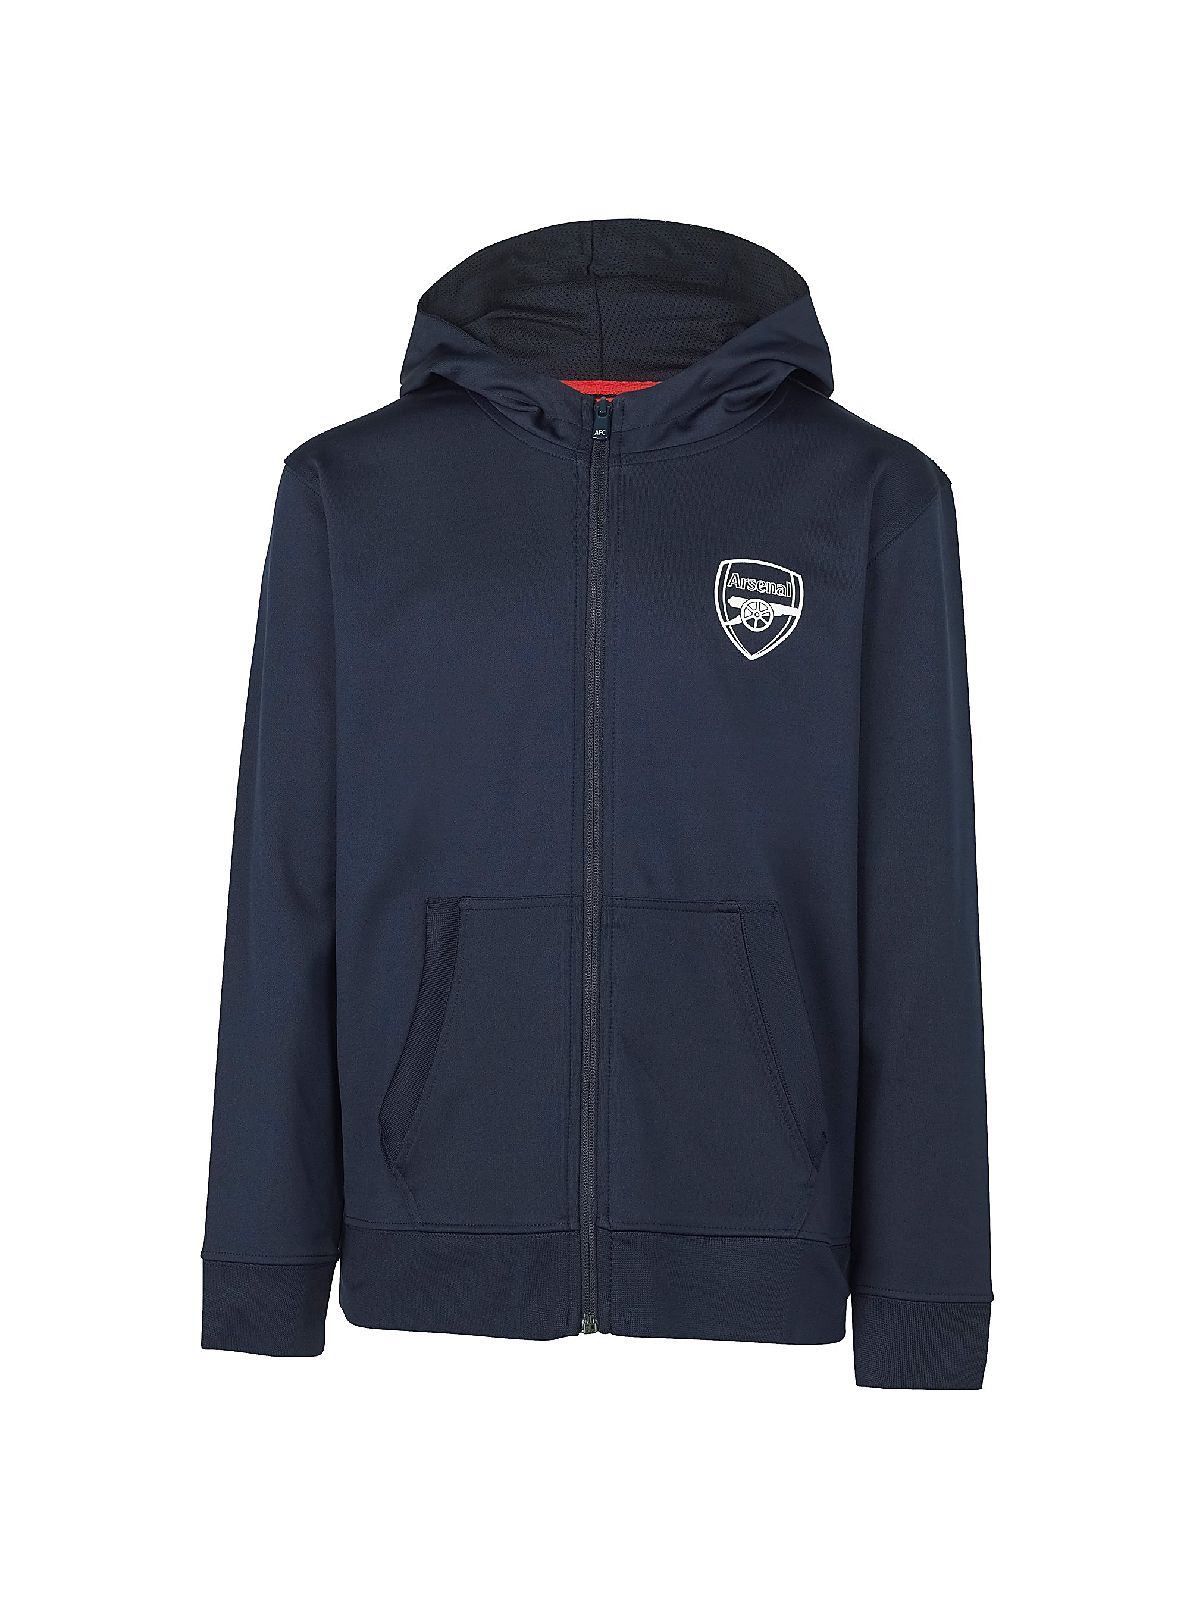 Arsenal Kids Leisure Tricot Hoody Navy | Official Online Store